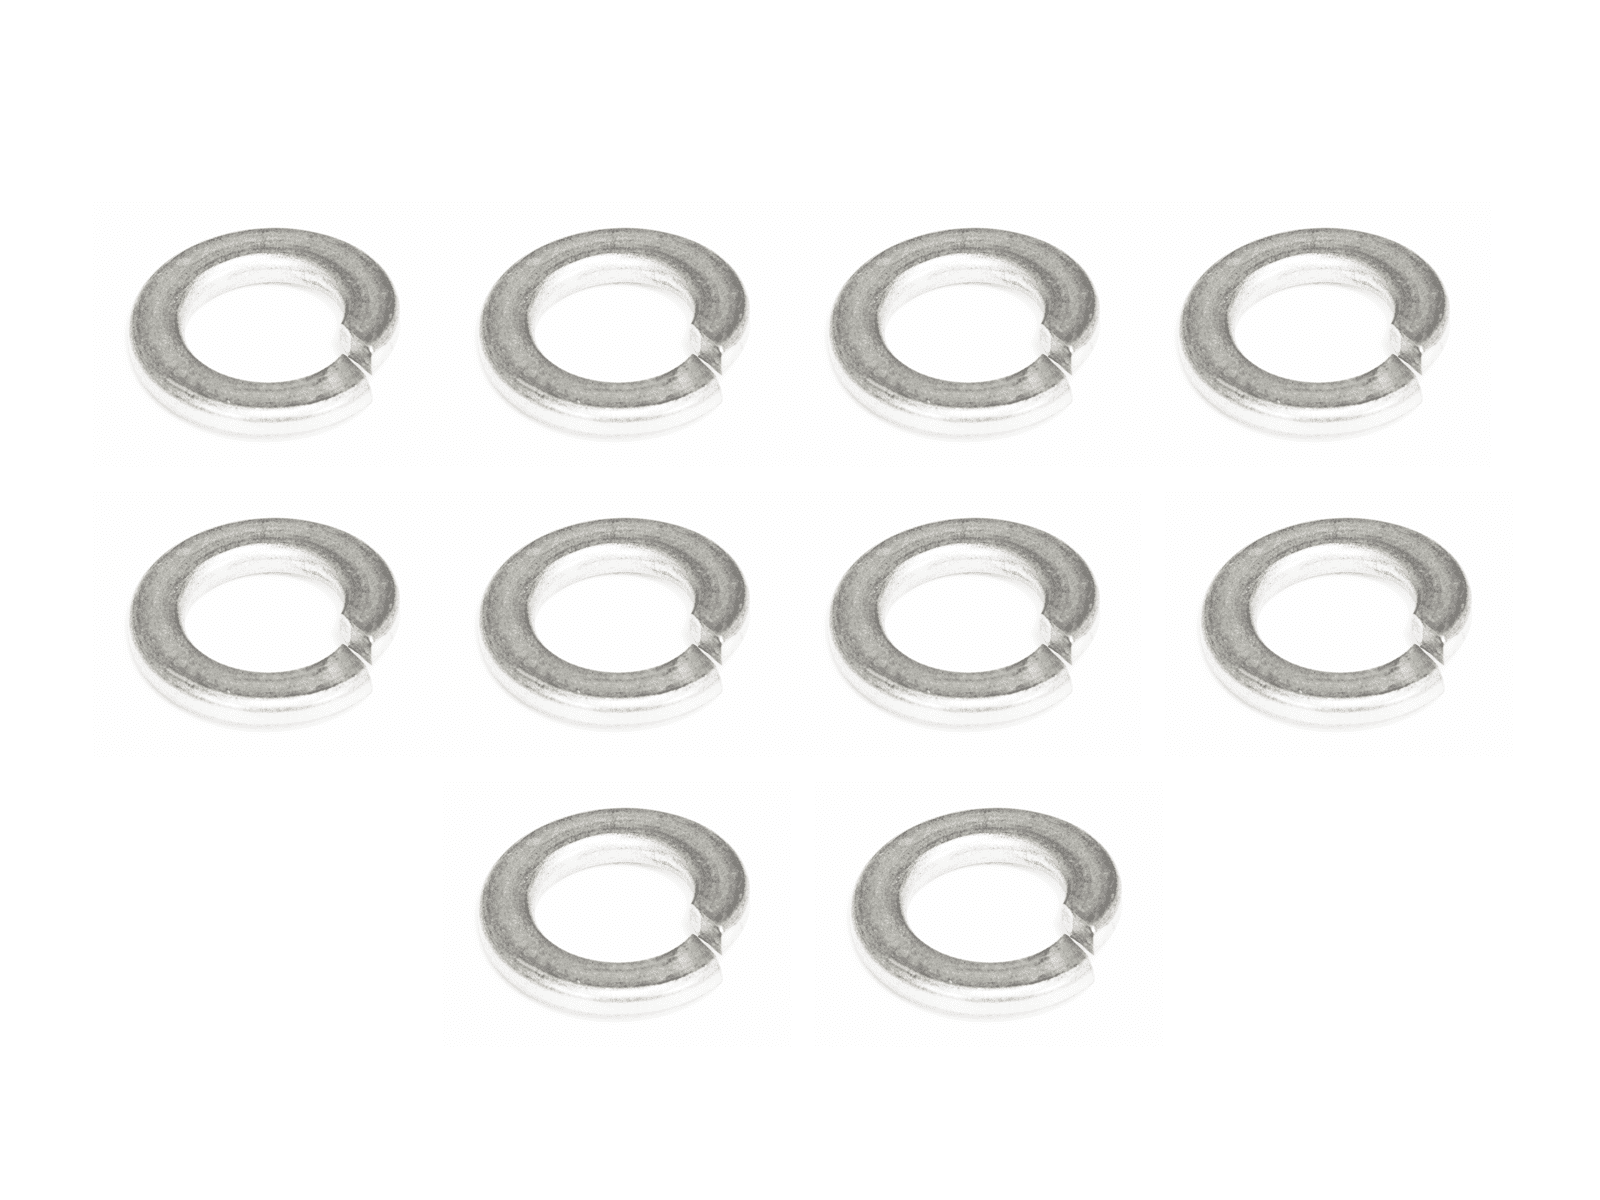 M8 Lock Washers, SUS304 Stainless, 10-Pack Dress Up Bolt Stainless Steel SUS304 Silver Socket Cap Head FHSC SHSC Hardware